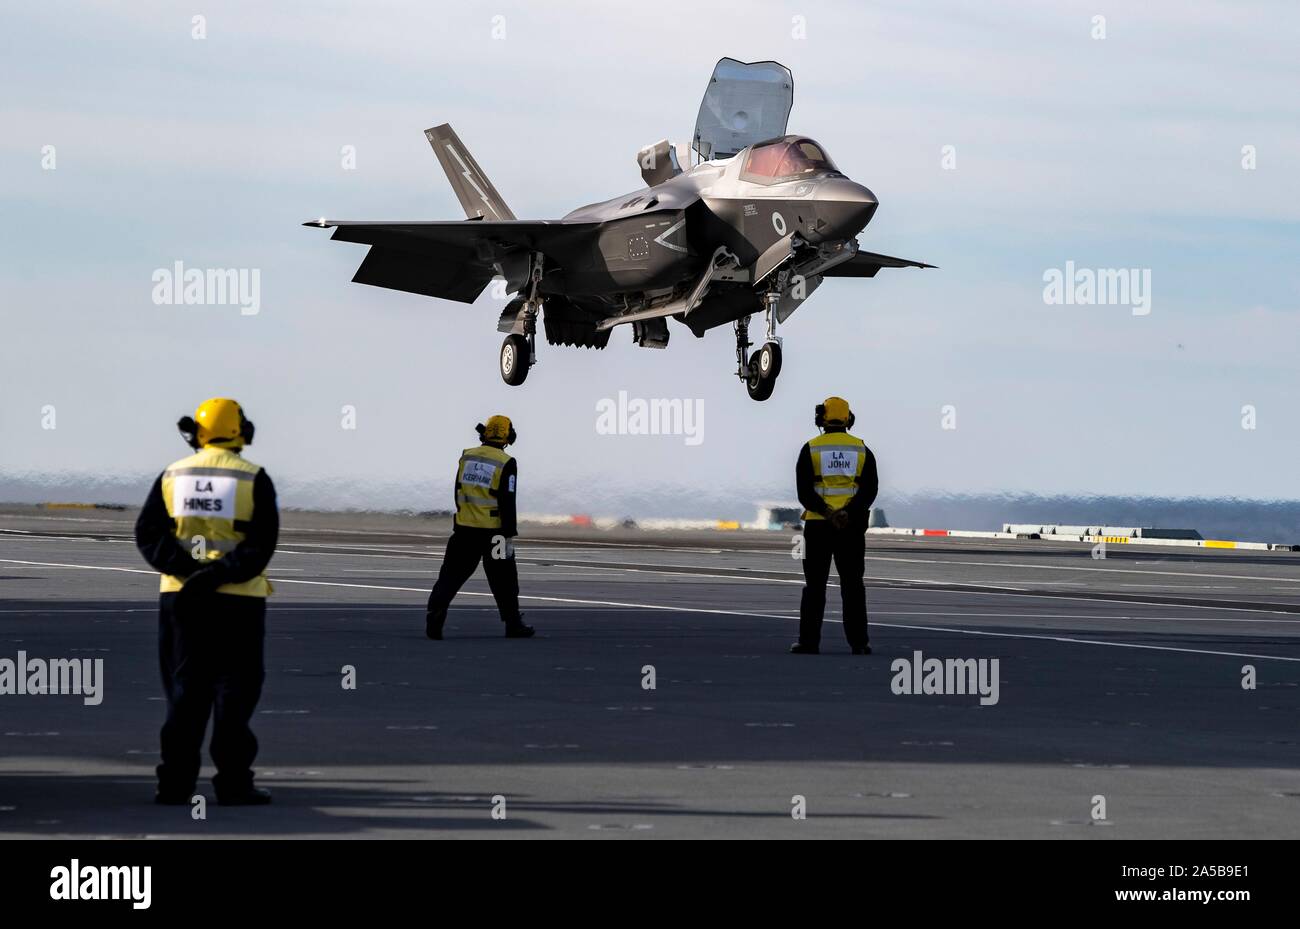 A Royal Navy F-35B Lightning stealth fighter aircraft performs a vertical landing on the flight deck of the HMS Queen Elizabeth during flight operations October 17, 2019 in the Atlantic Ocean. HMS Queen Elizabeth, is the largest warship ever built by the Royal Navy and is currently deployed in support of exercise WESTLANT 19. Stock Photo